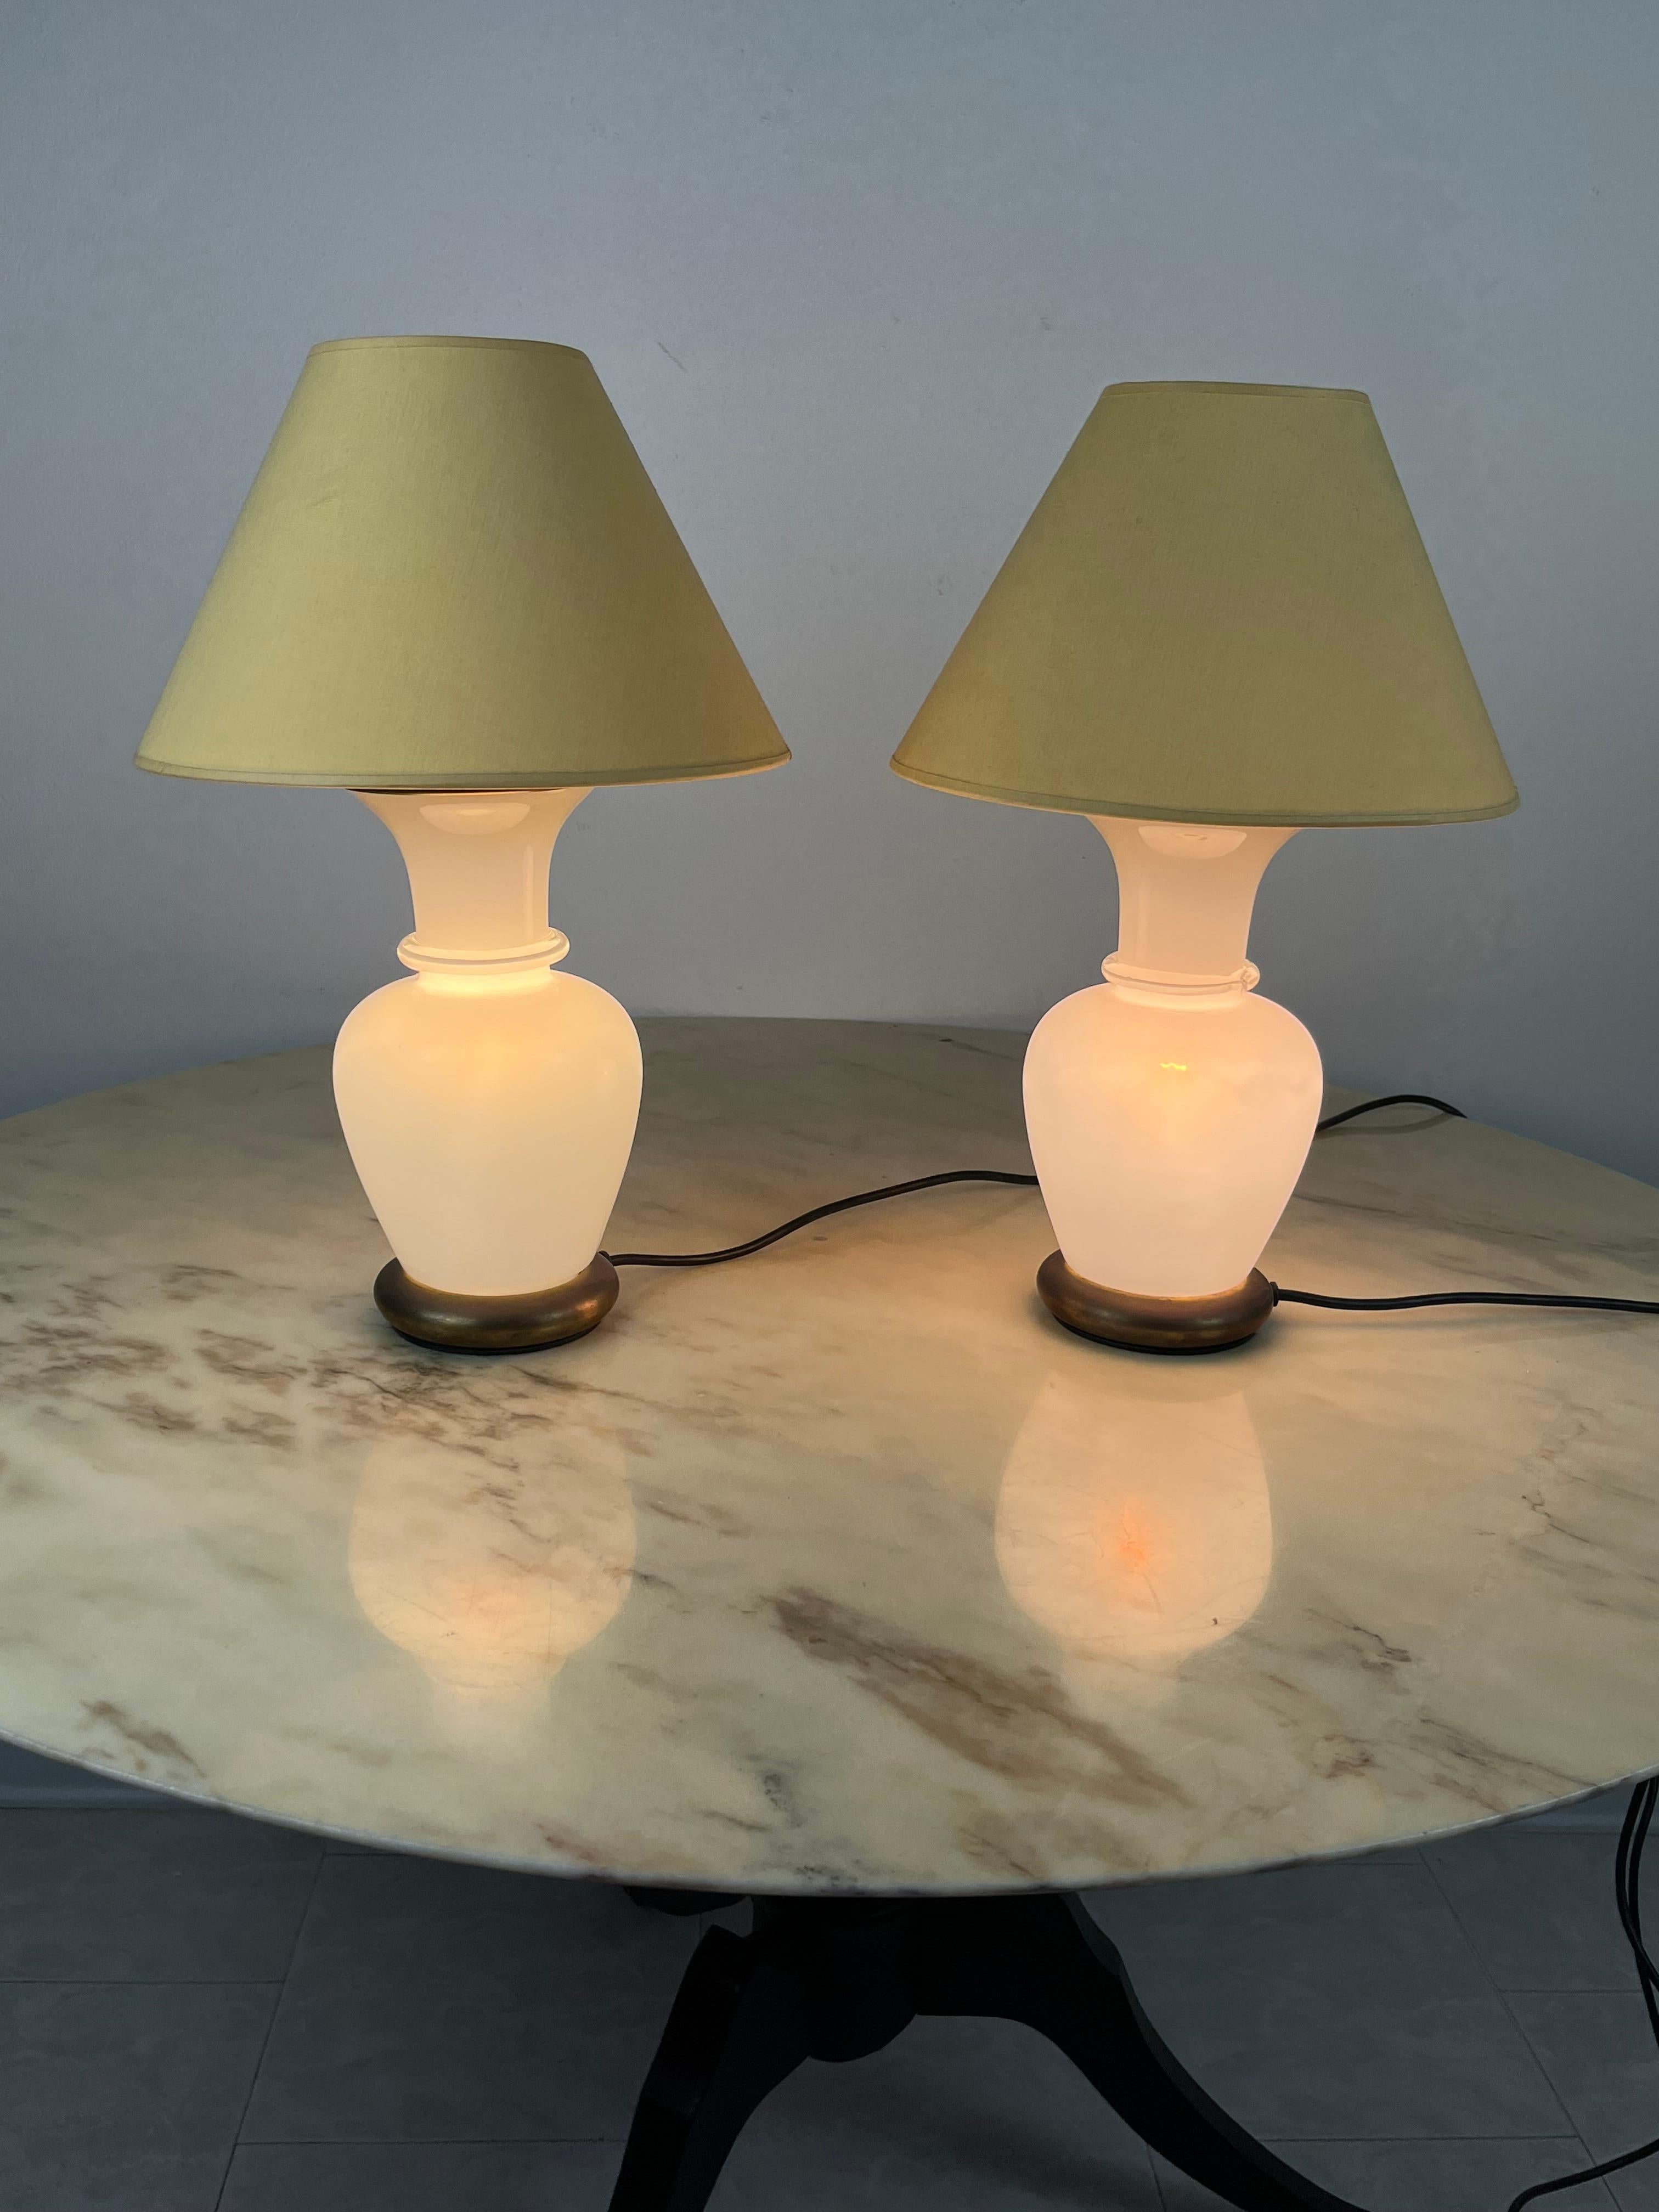 Set of 3 Murano Glass and Brass Table Lamps, F. Fabbian, Italy, 1970s For Sale 4